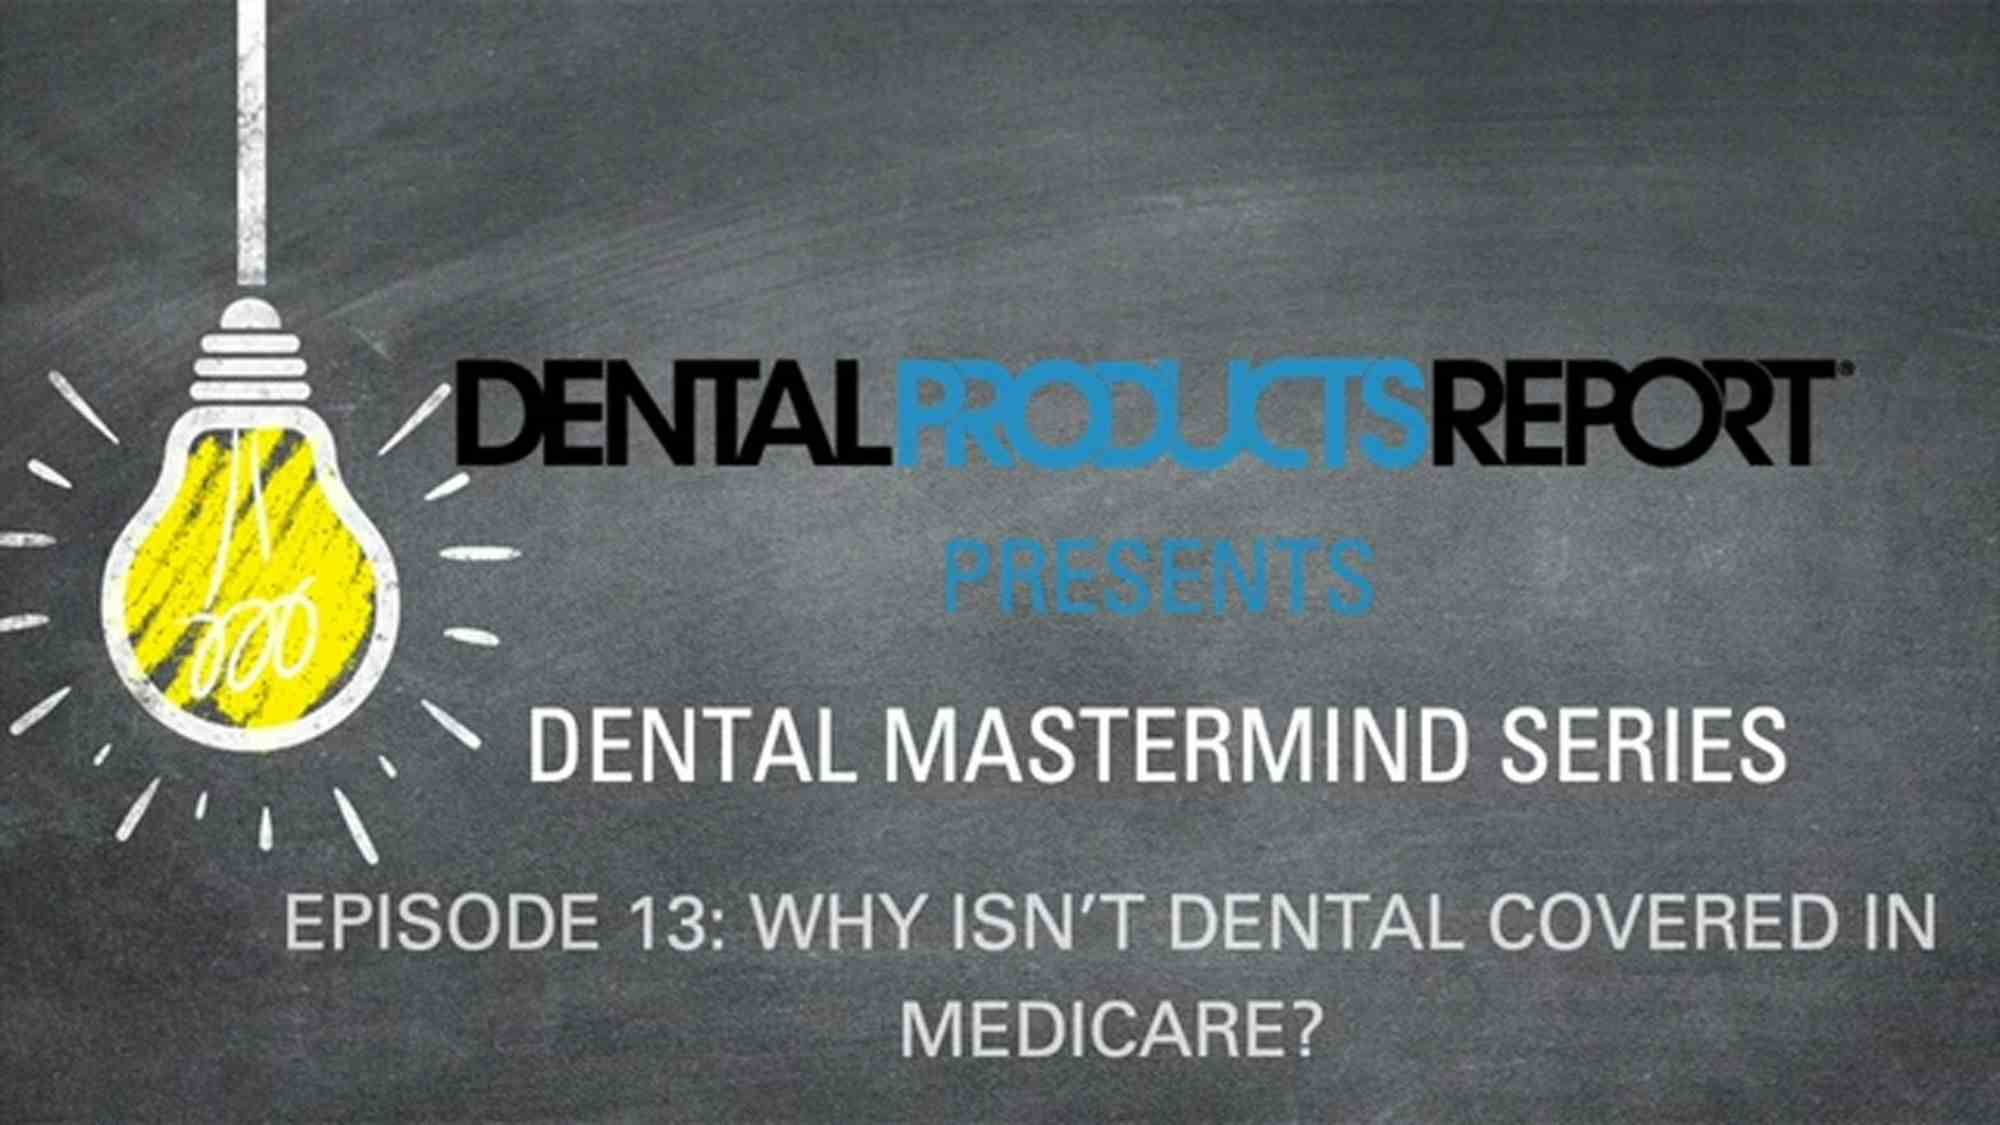 Mastermind - Episode 13 - Why isn't Dental Covered in Medicare?